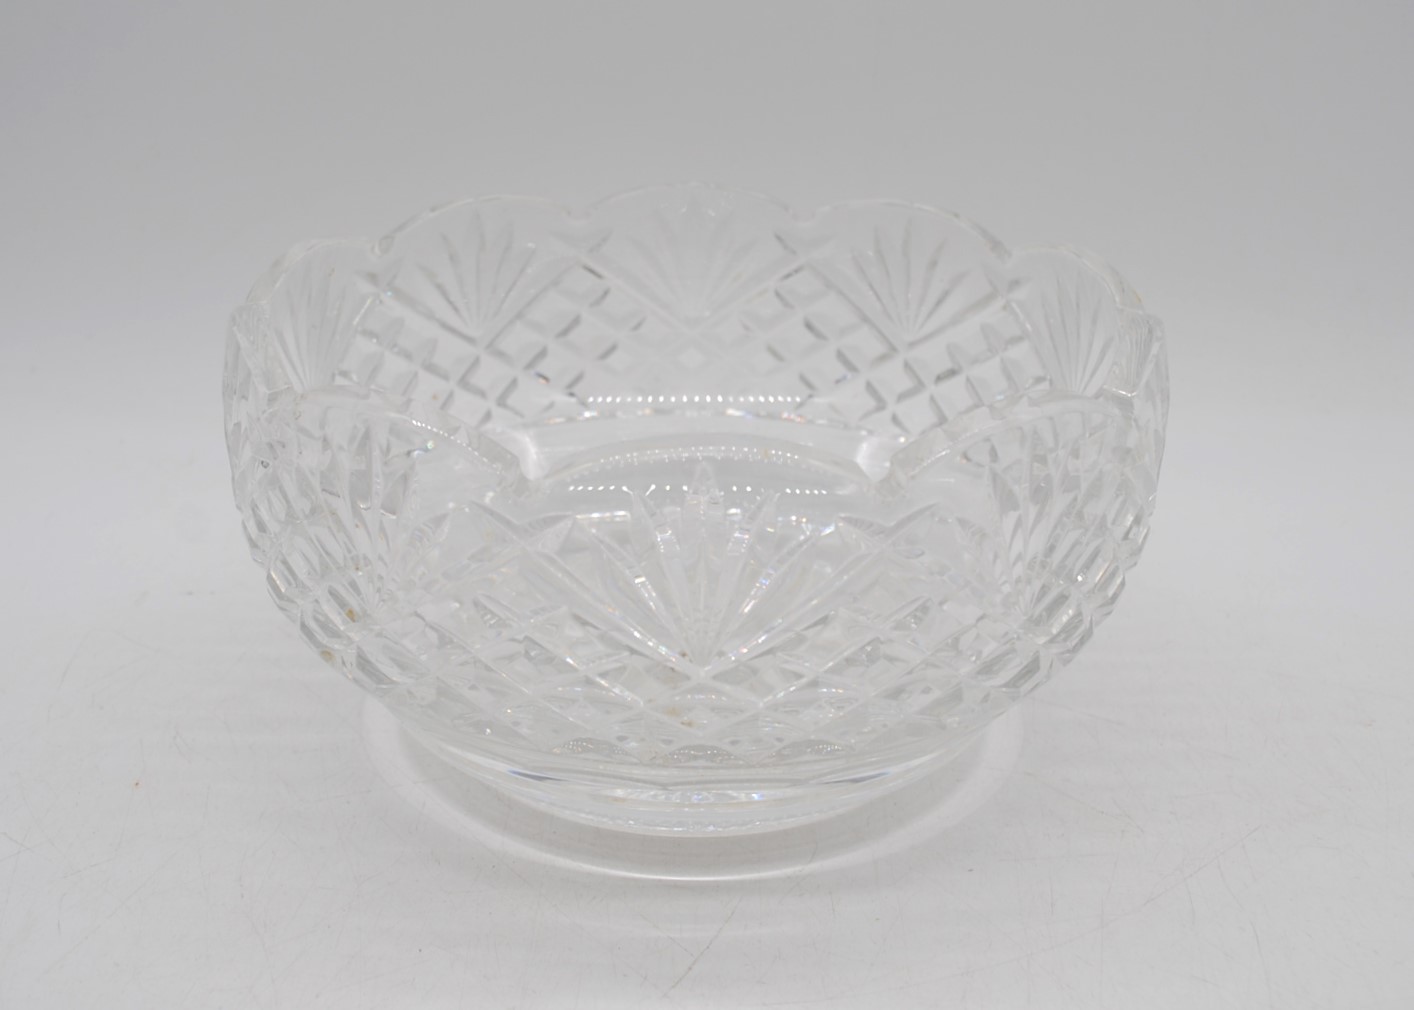 A pair of Shelley cups and saucers, along with a Waterford crystal bowl, with COA and original box - Image 6 of 8